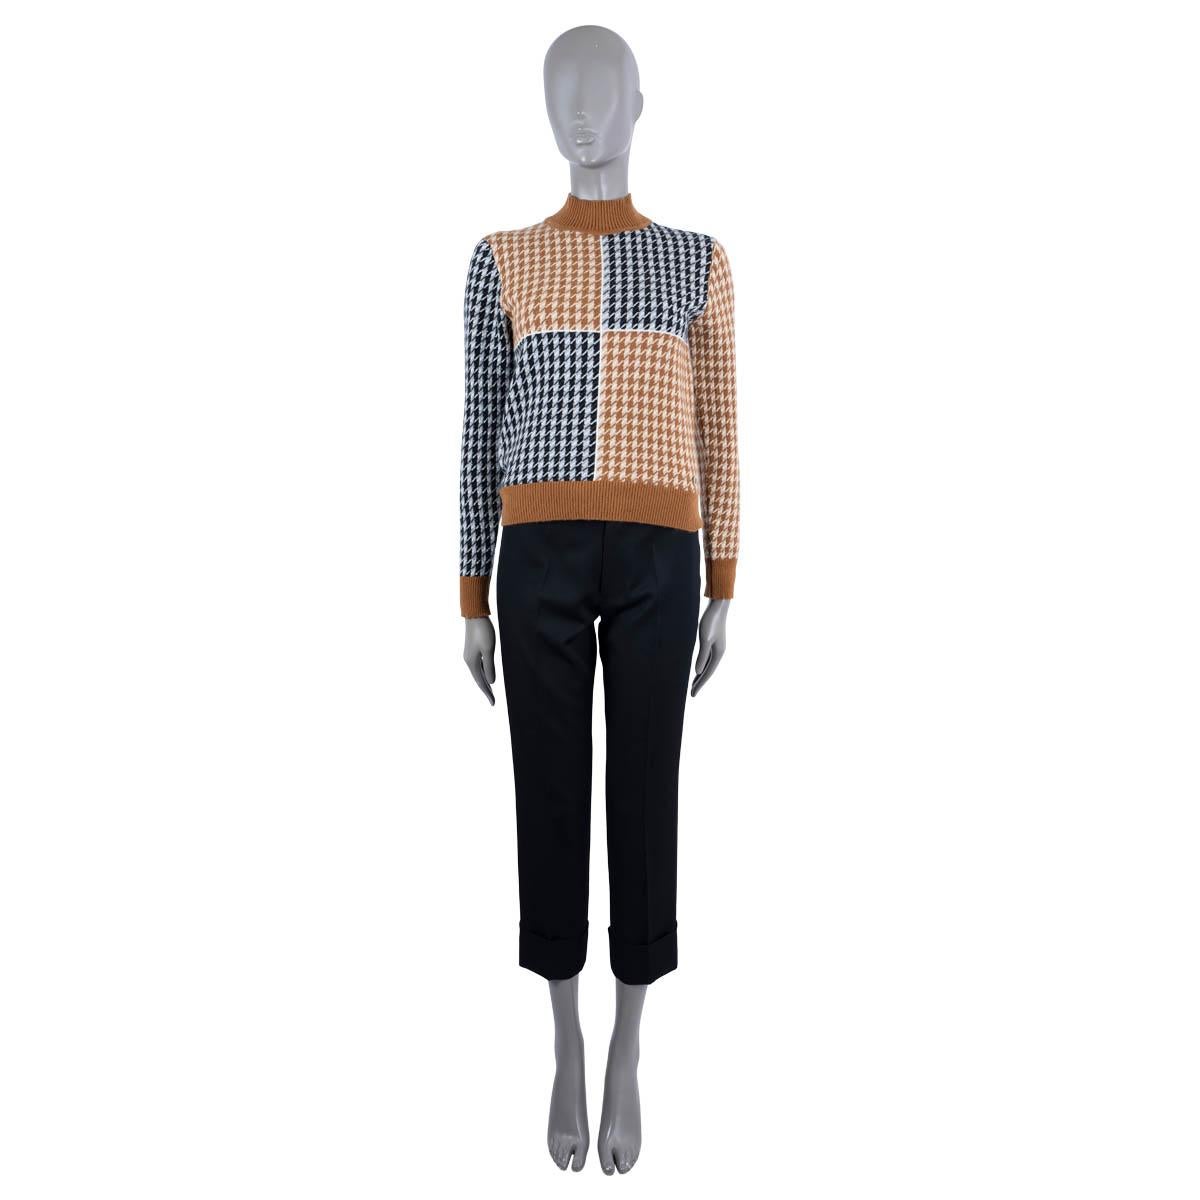 100% authentic Hermès houndstooth sweater in camel brown, beige, ivory, navy blue and grey cashmere (100%). Features a mock neck, hem and cuffs in rib-knit. Has been worn and is in excellent condition.

2019 Fall/Winter

Measurements
Tag